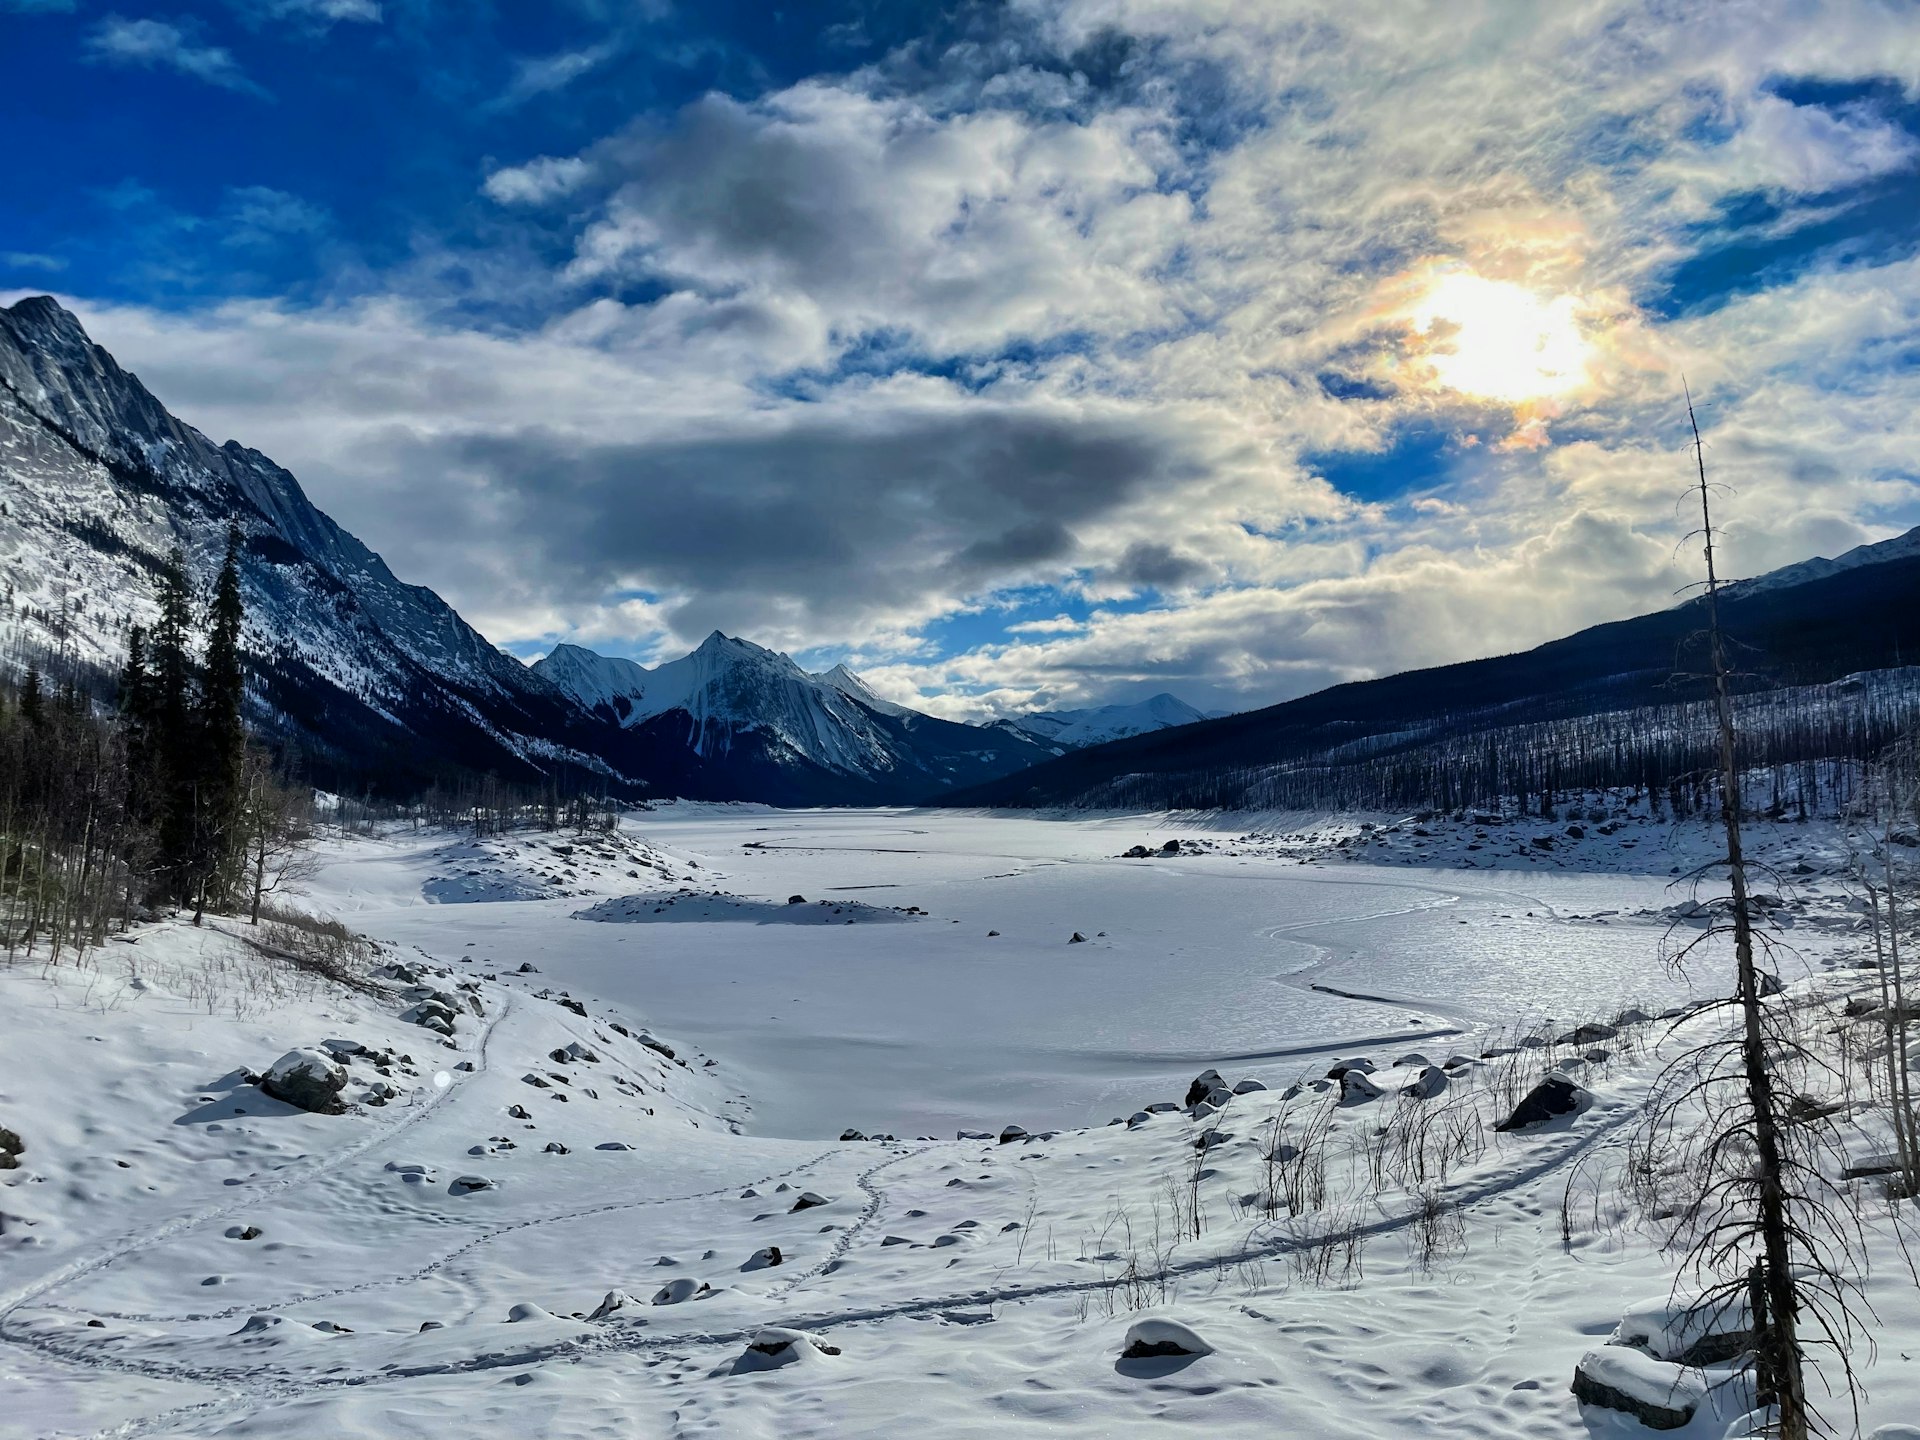 Winter on Medicine Lake with snow blanketing the landscape